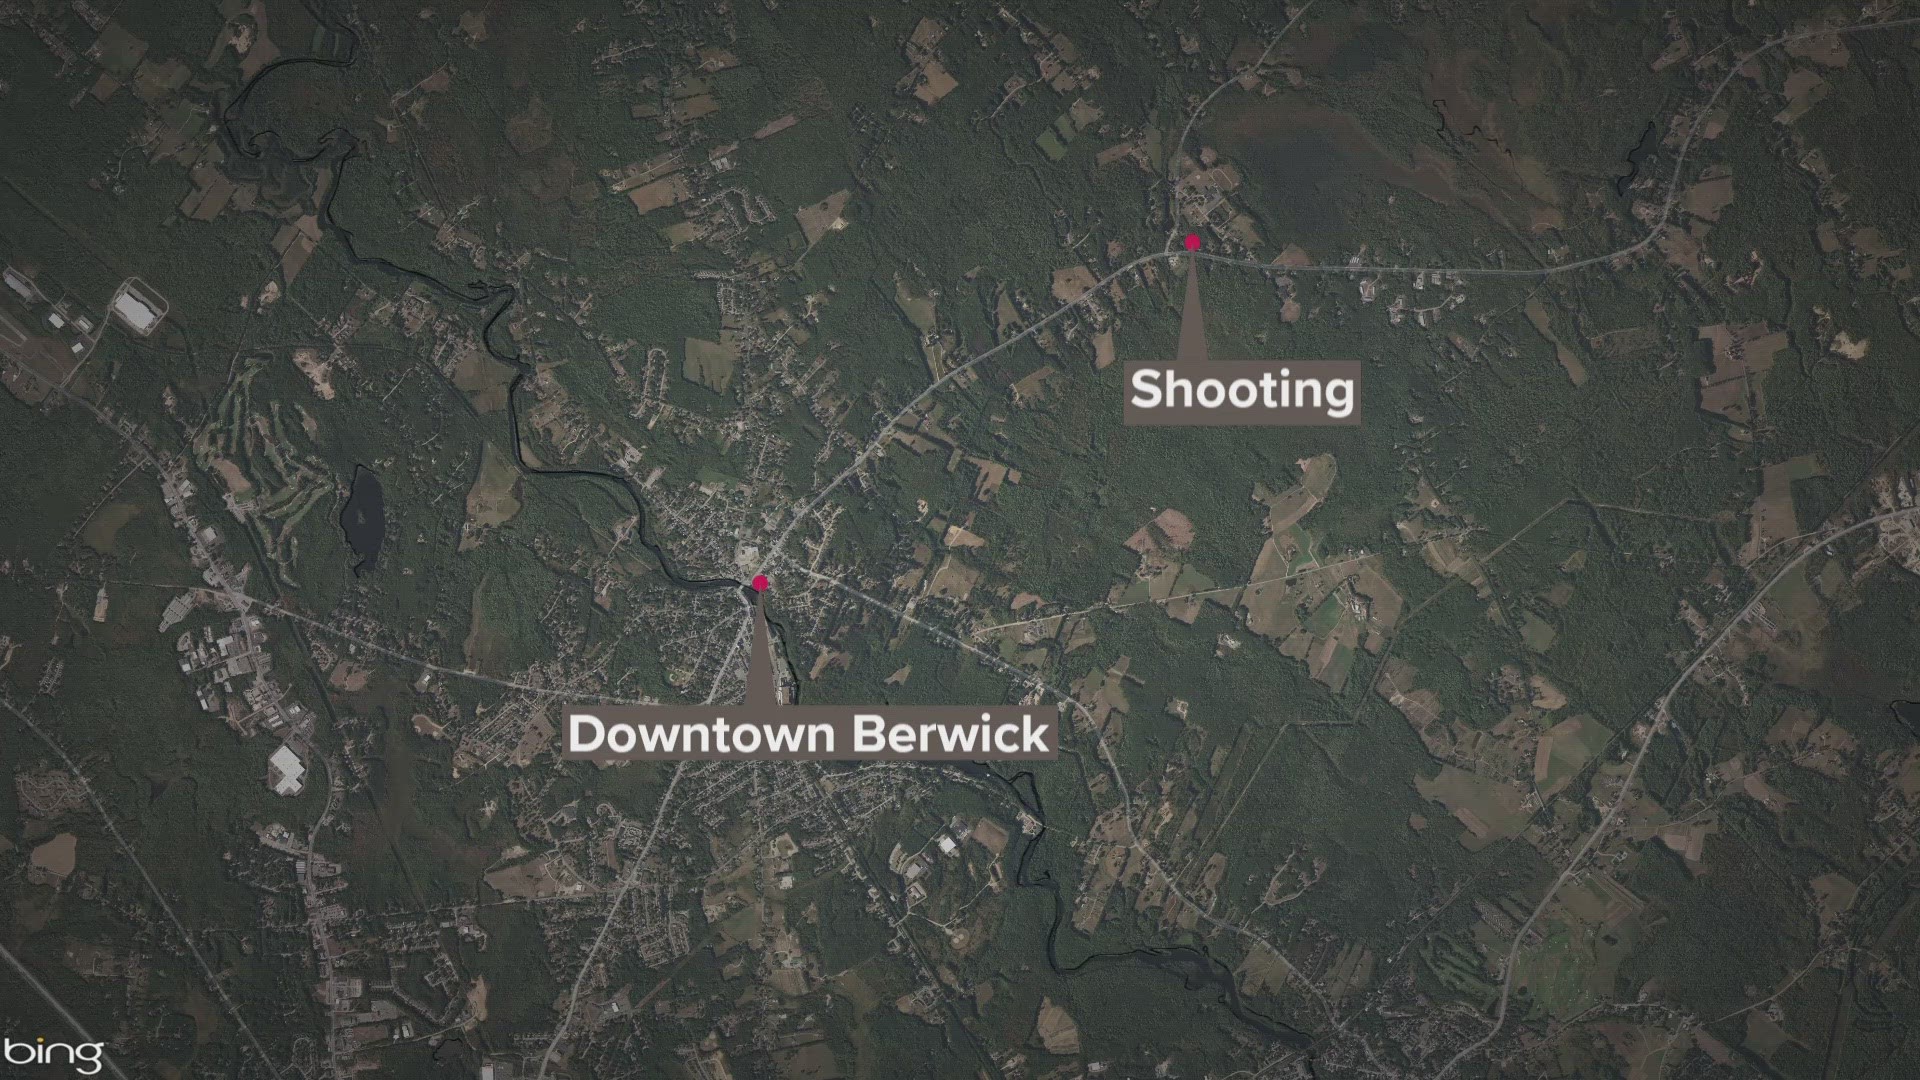 The Berwick Police Department responded to a call about a shooting shortly after 9 a.m. and upon arrival found two people suffering gunshot wounds.